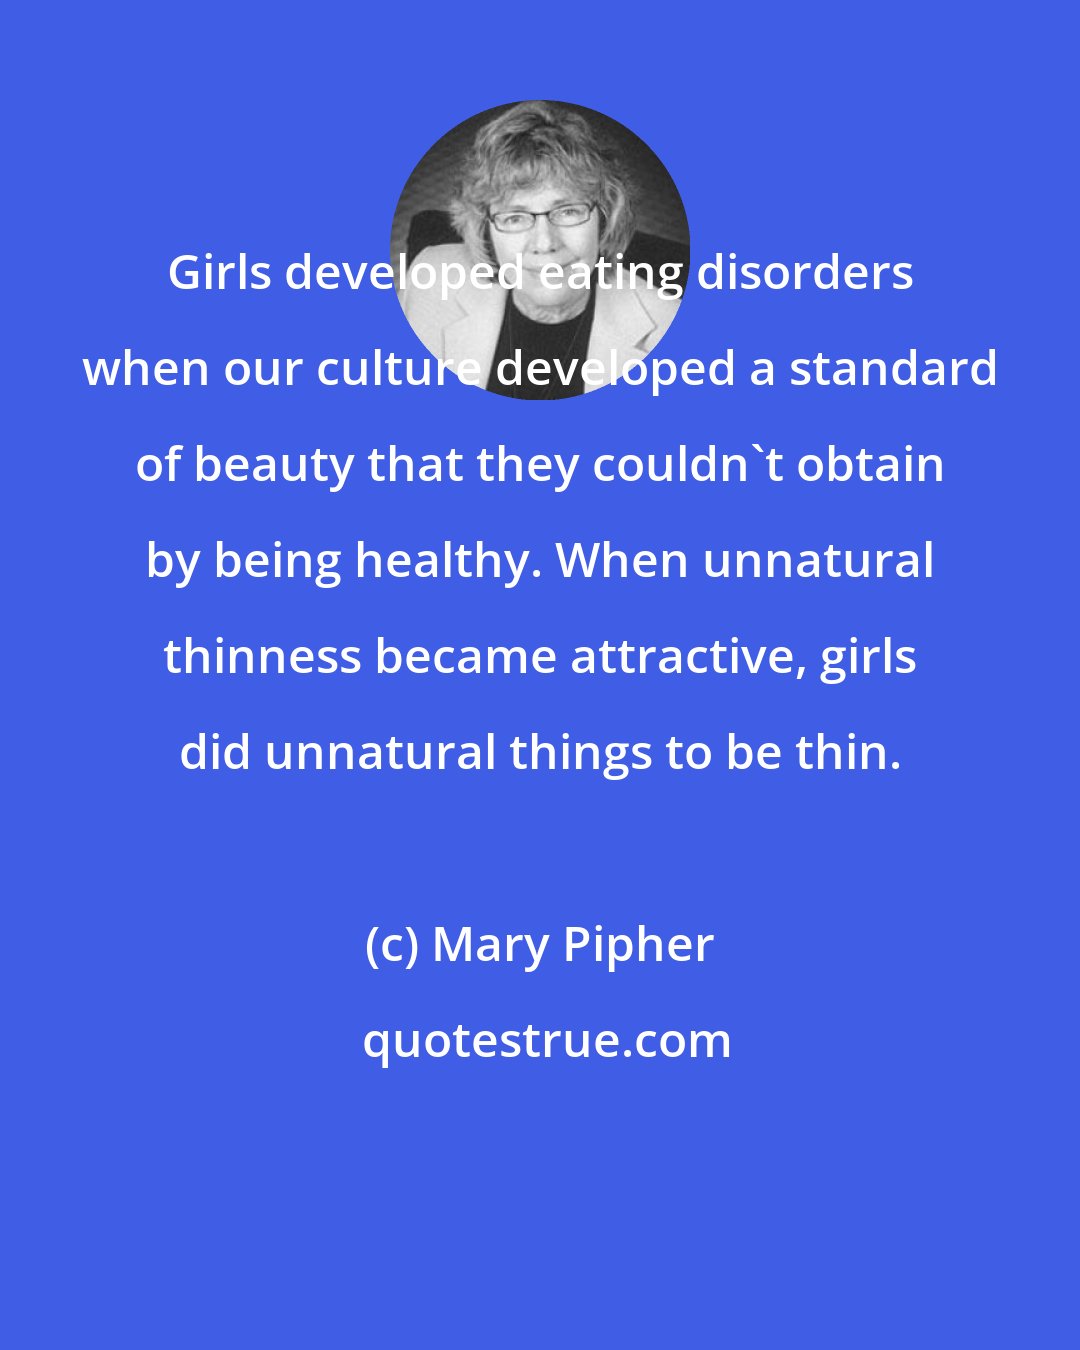 Mary Pipher: Girls developed eating disorders when our culture developed a standard of beauty that they couldn't obtain by being healthy. When unnatural thinness became attractive, girls did unnatural things to be thin.